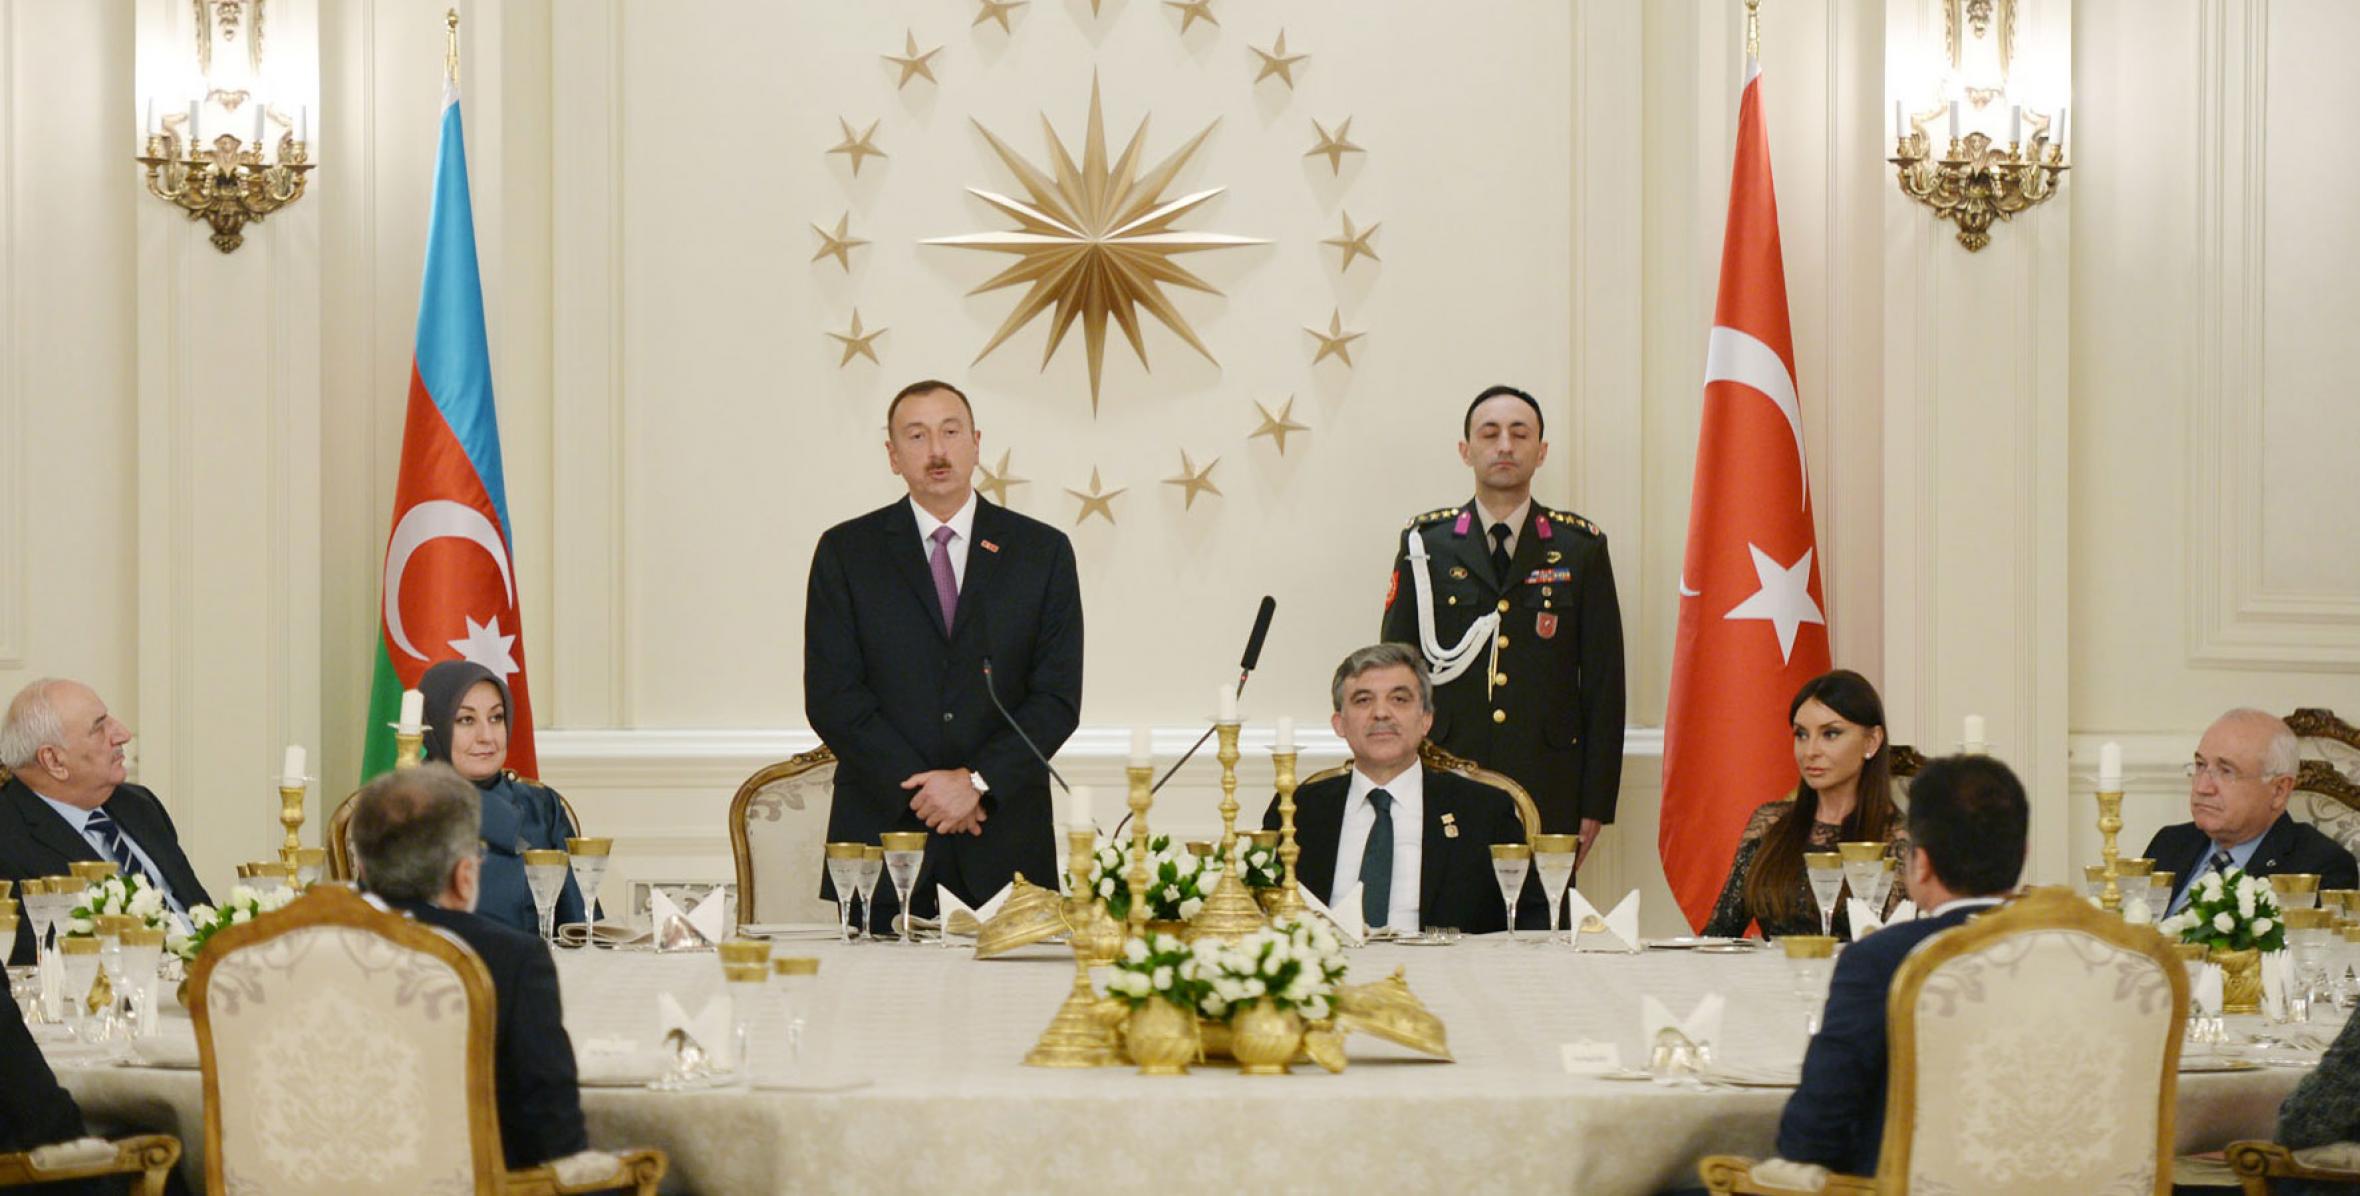 An official dinner was given in honour of Ilham Aliyev